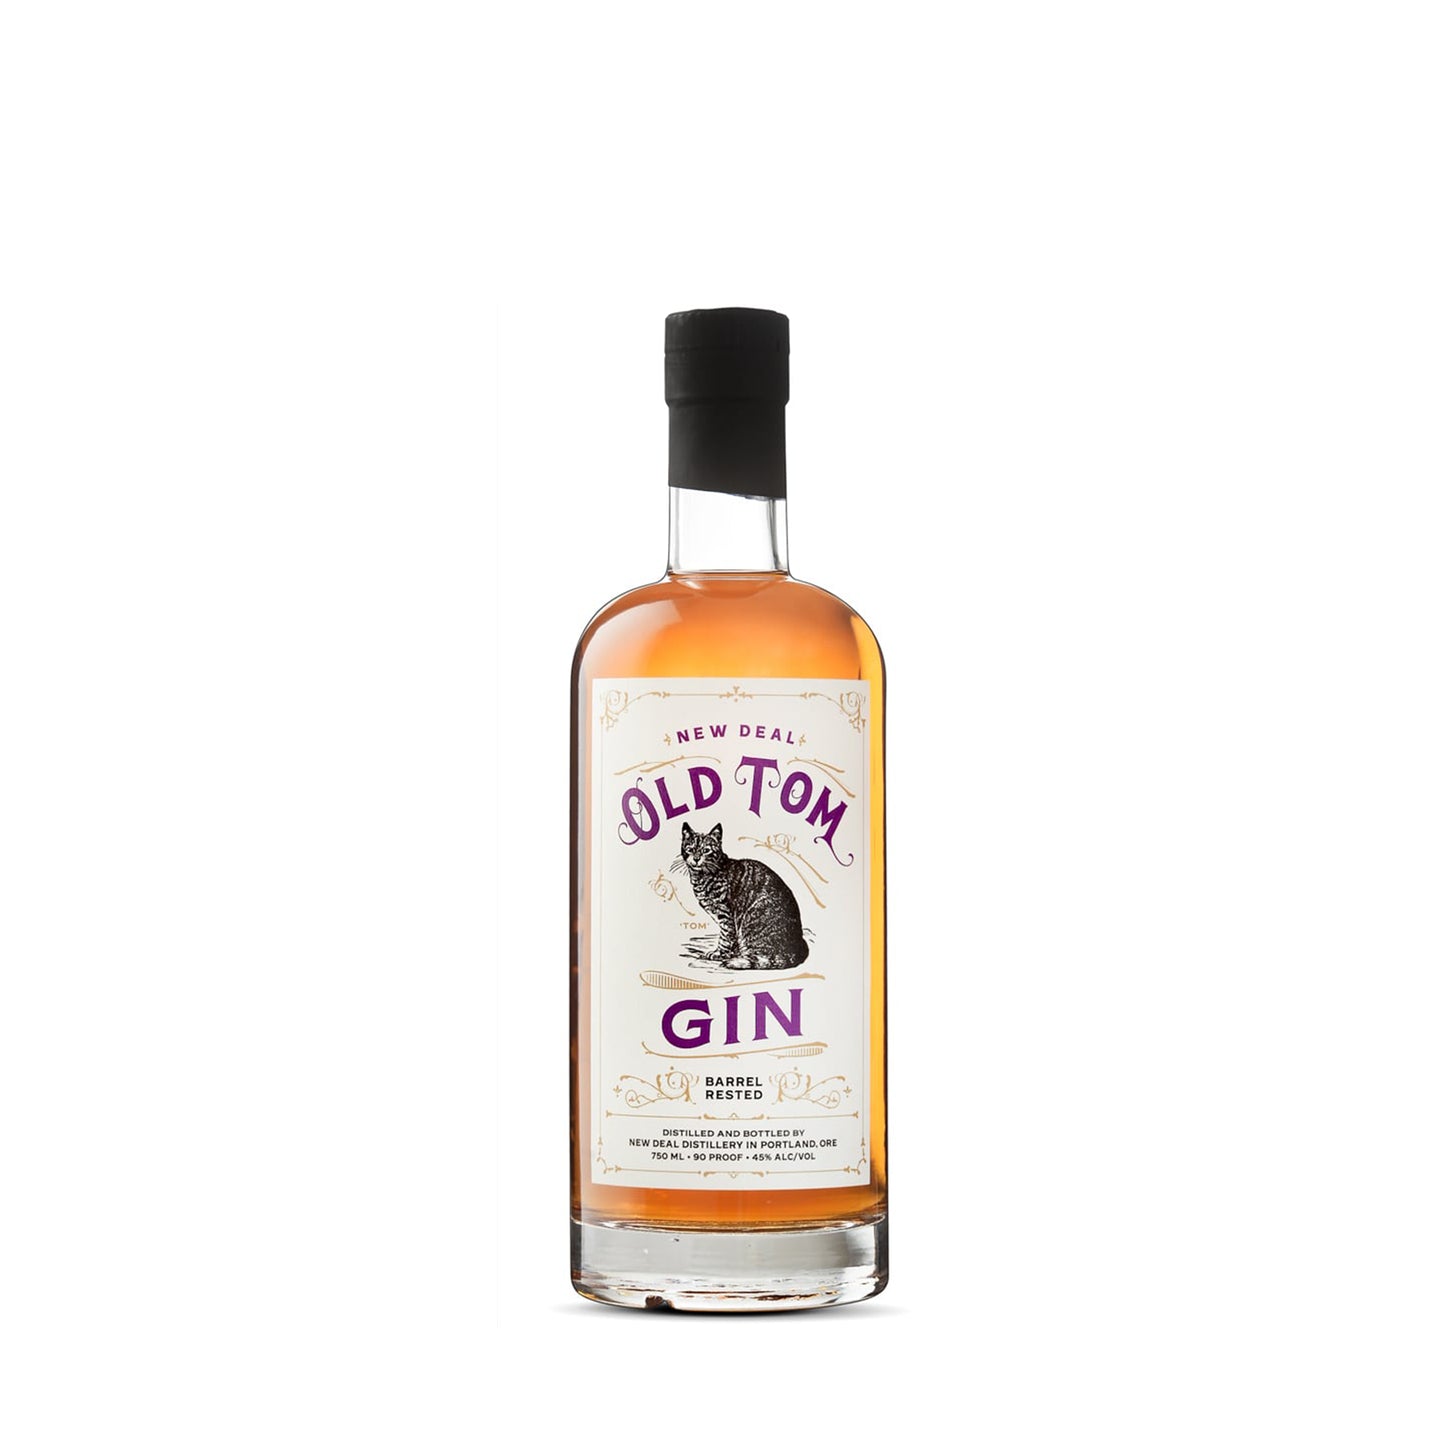 New Deal Old Tom Gin